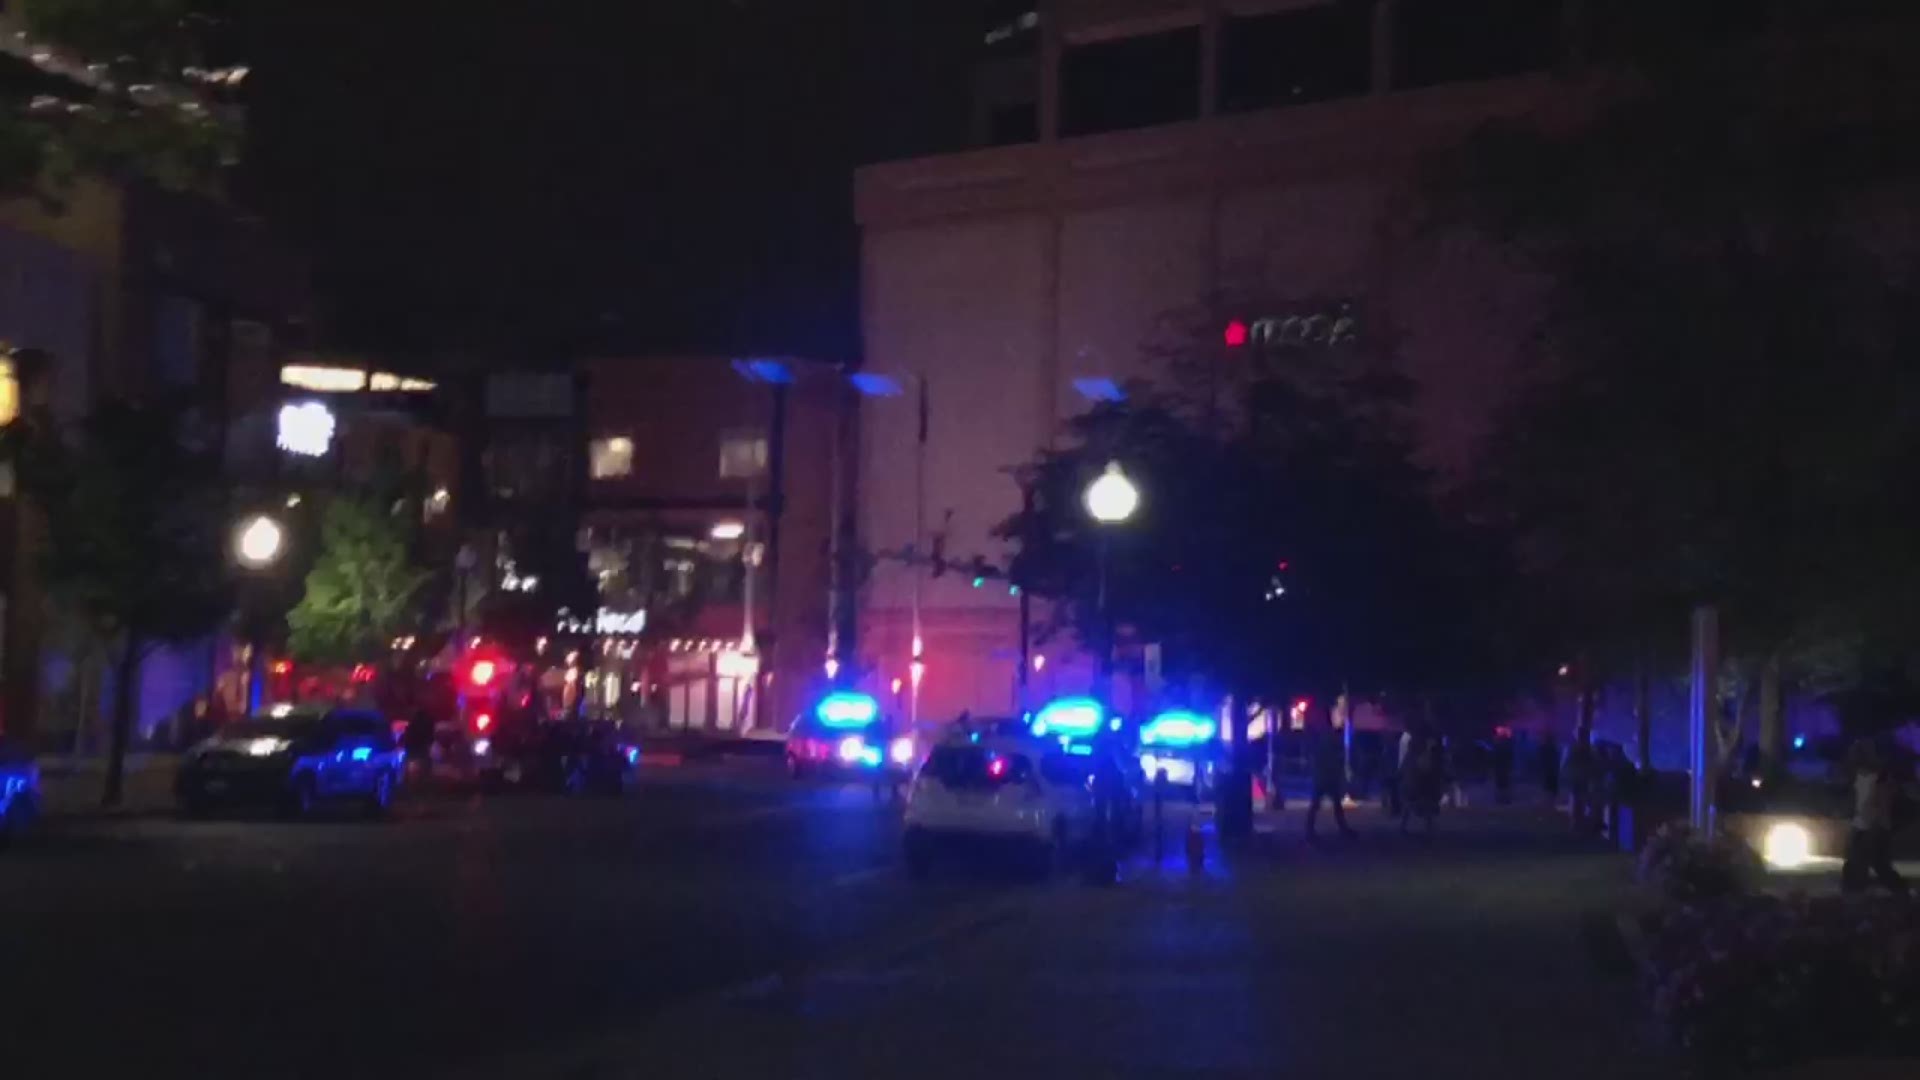 Arlington County police are responding to the report of a shooting at the Ballston Quarter mall -- formerly known as Ballston Mall. Police have not yet found any evidence of a shooting at this time.